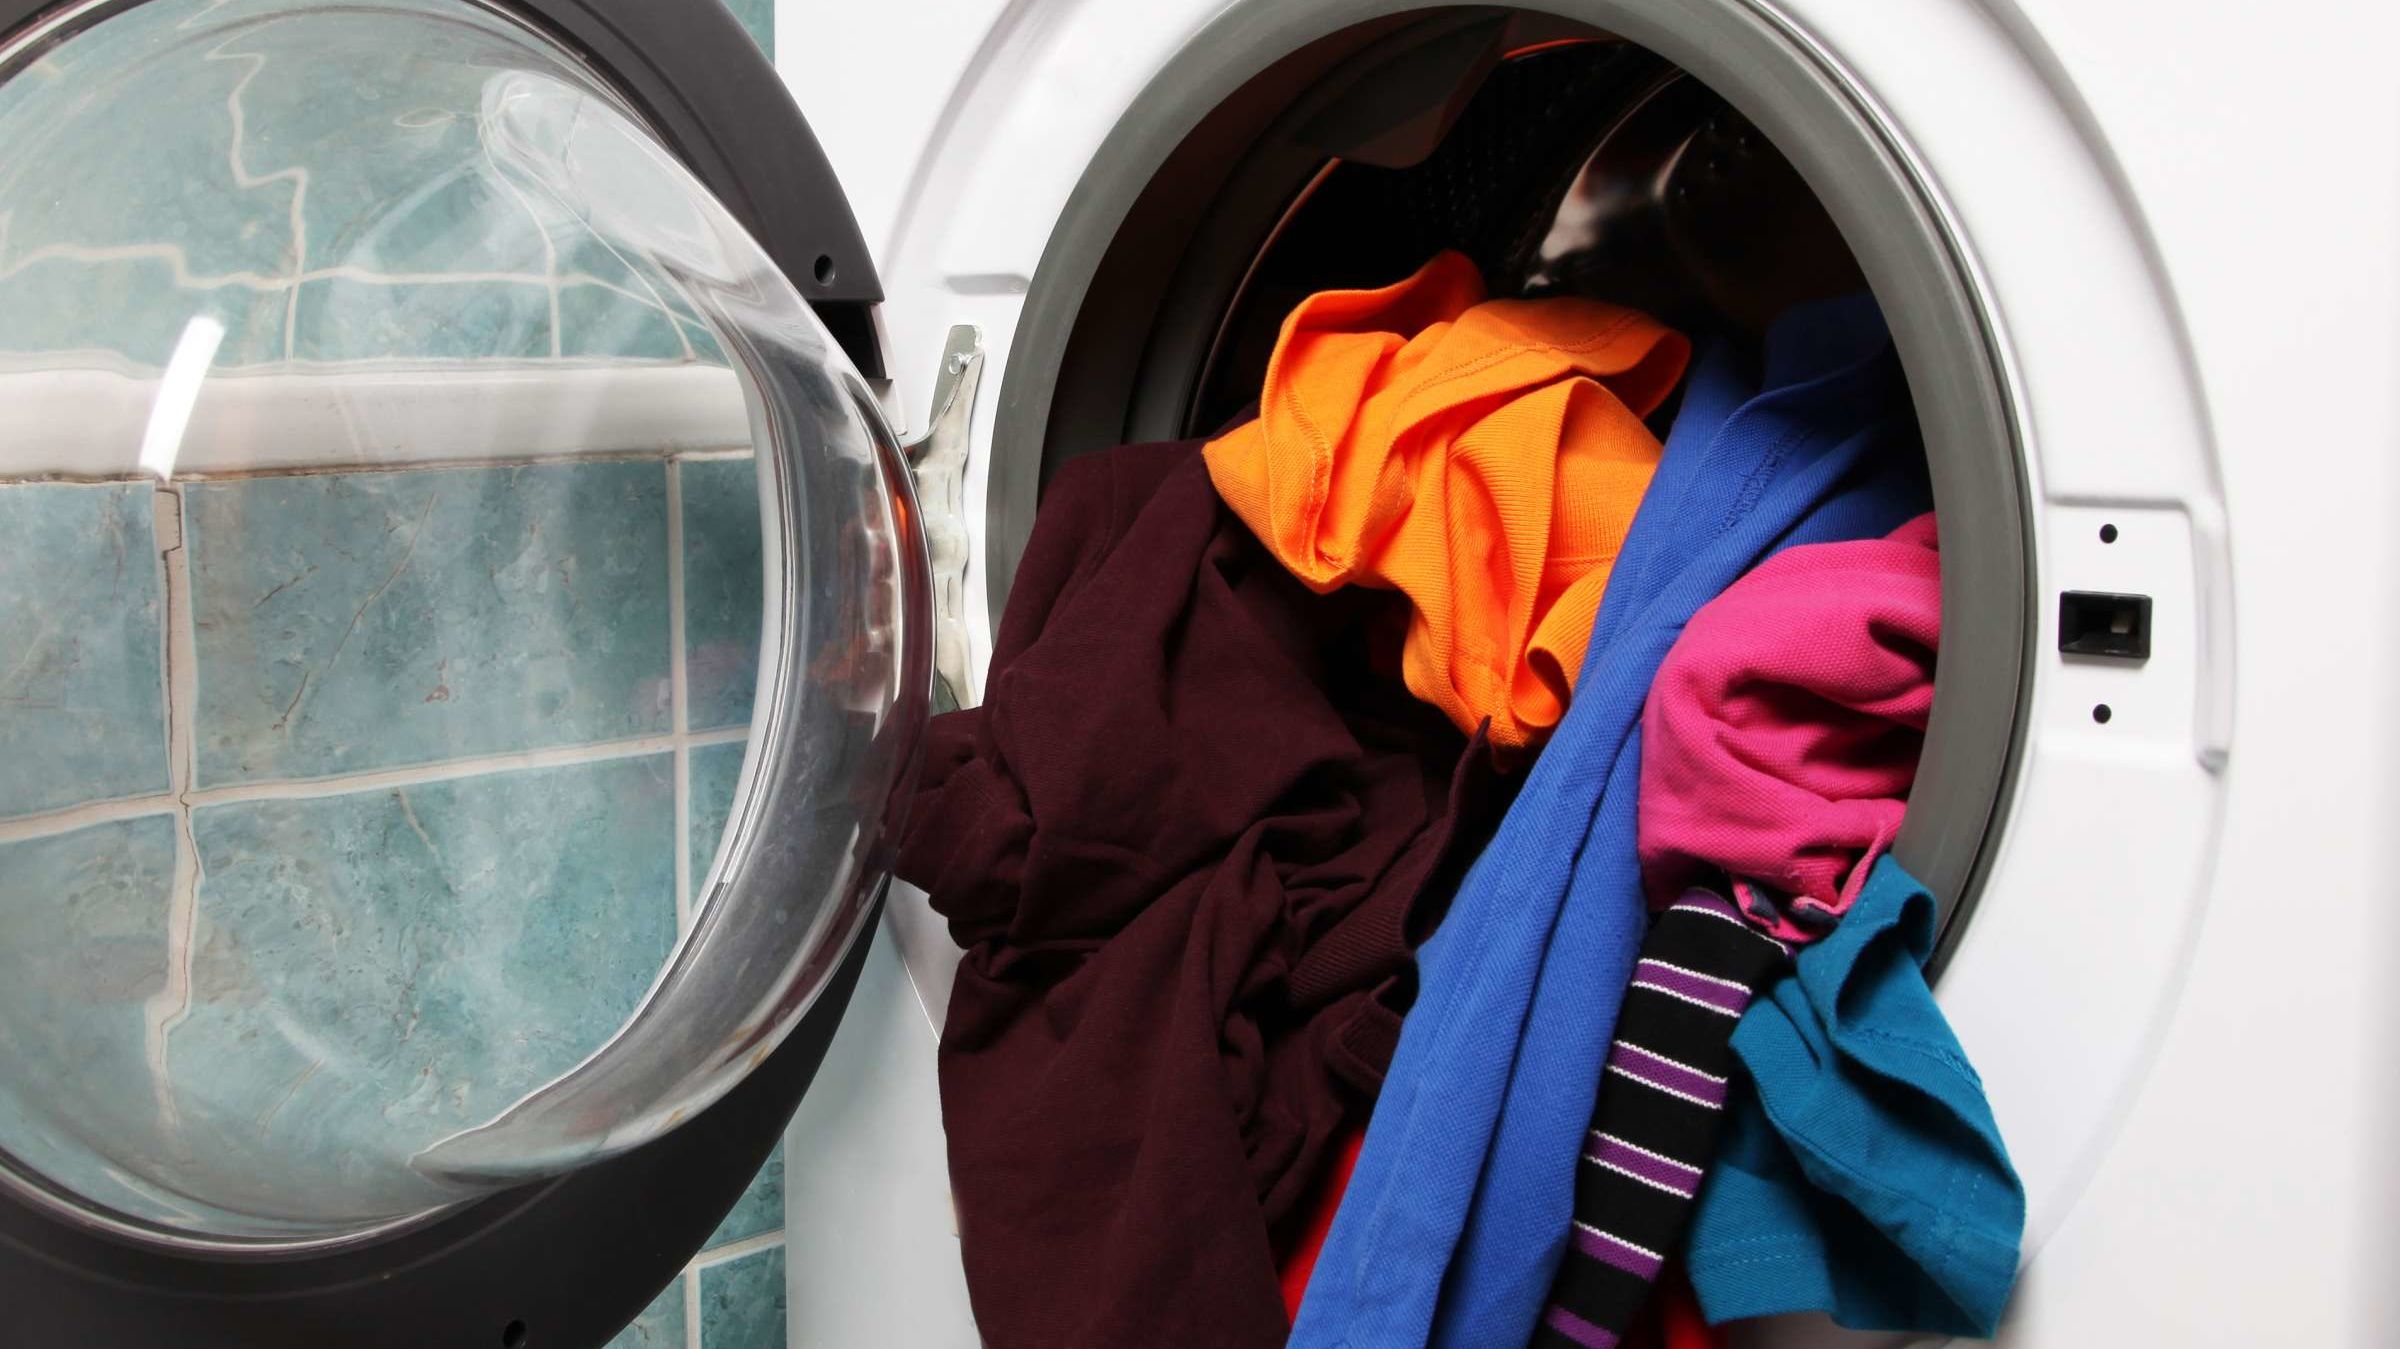 Phoenix High School Builds Laundry Room for Students | Mental Floss